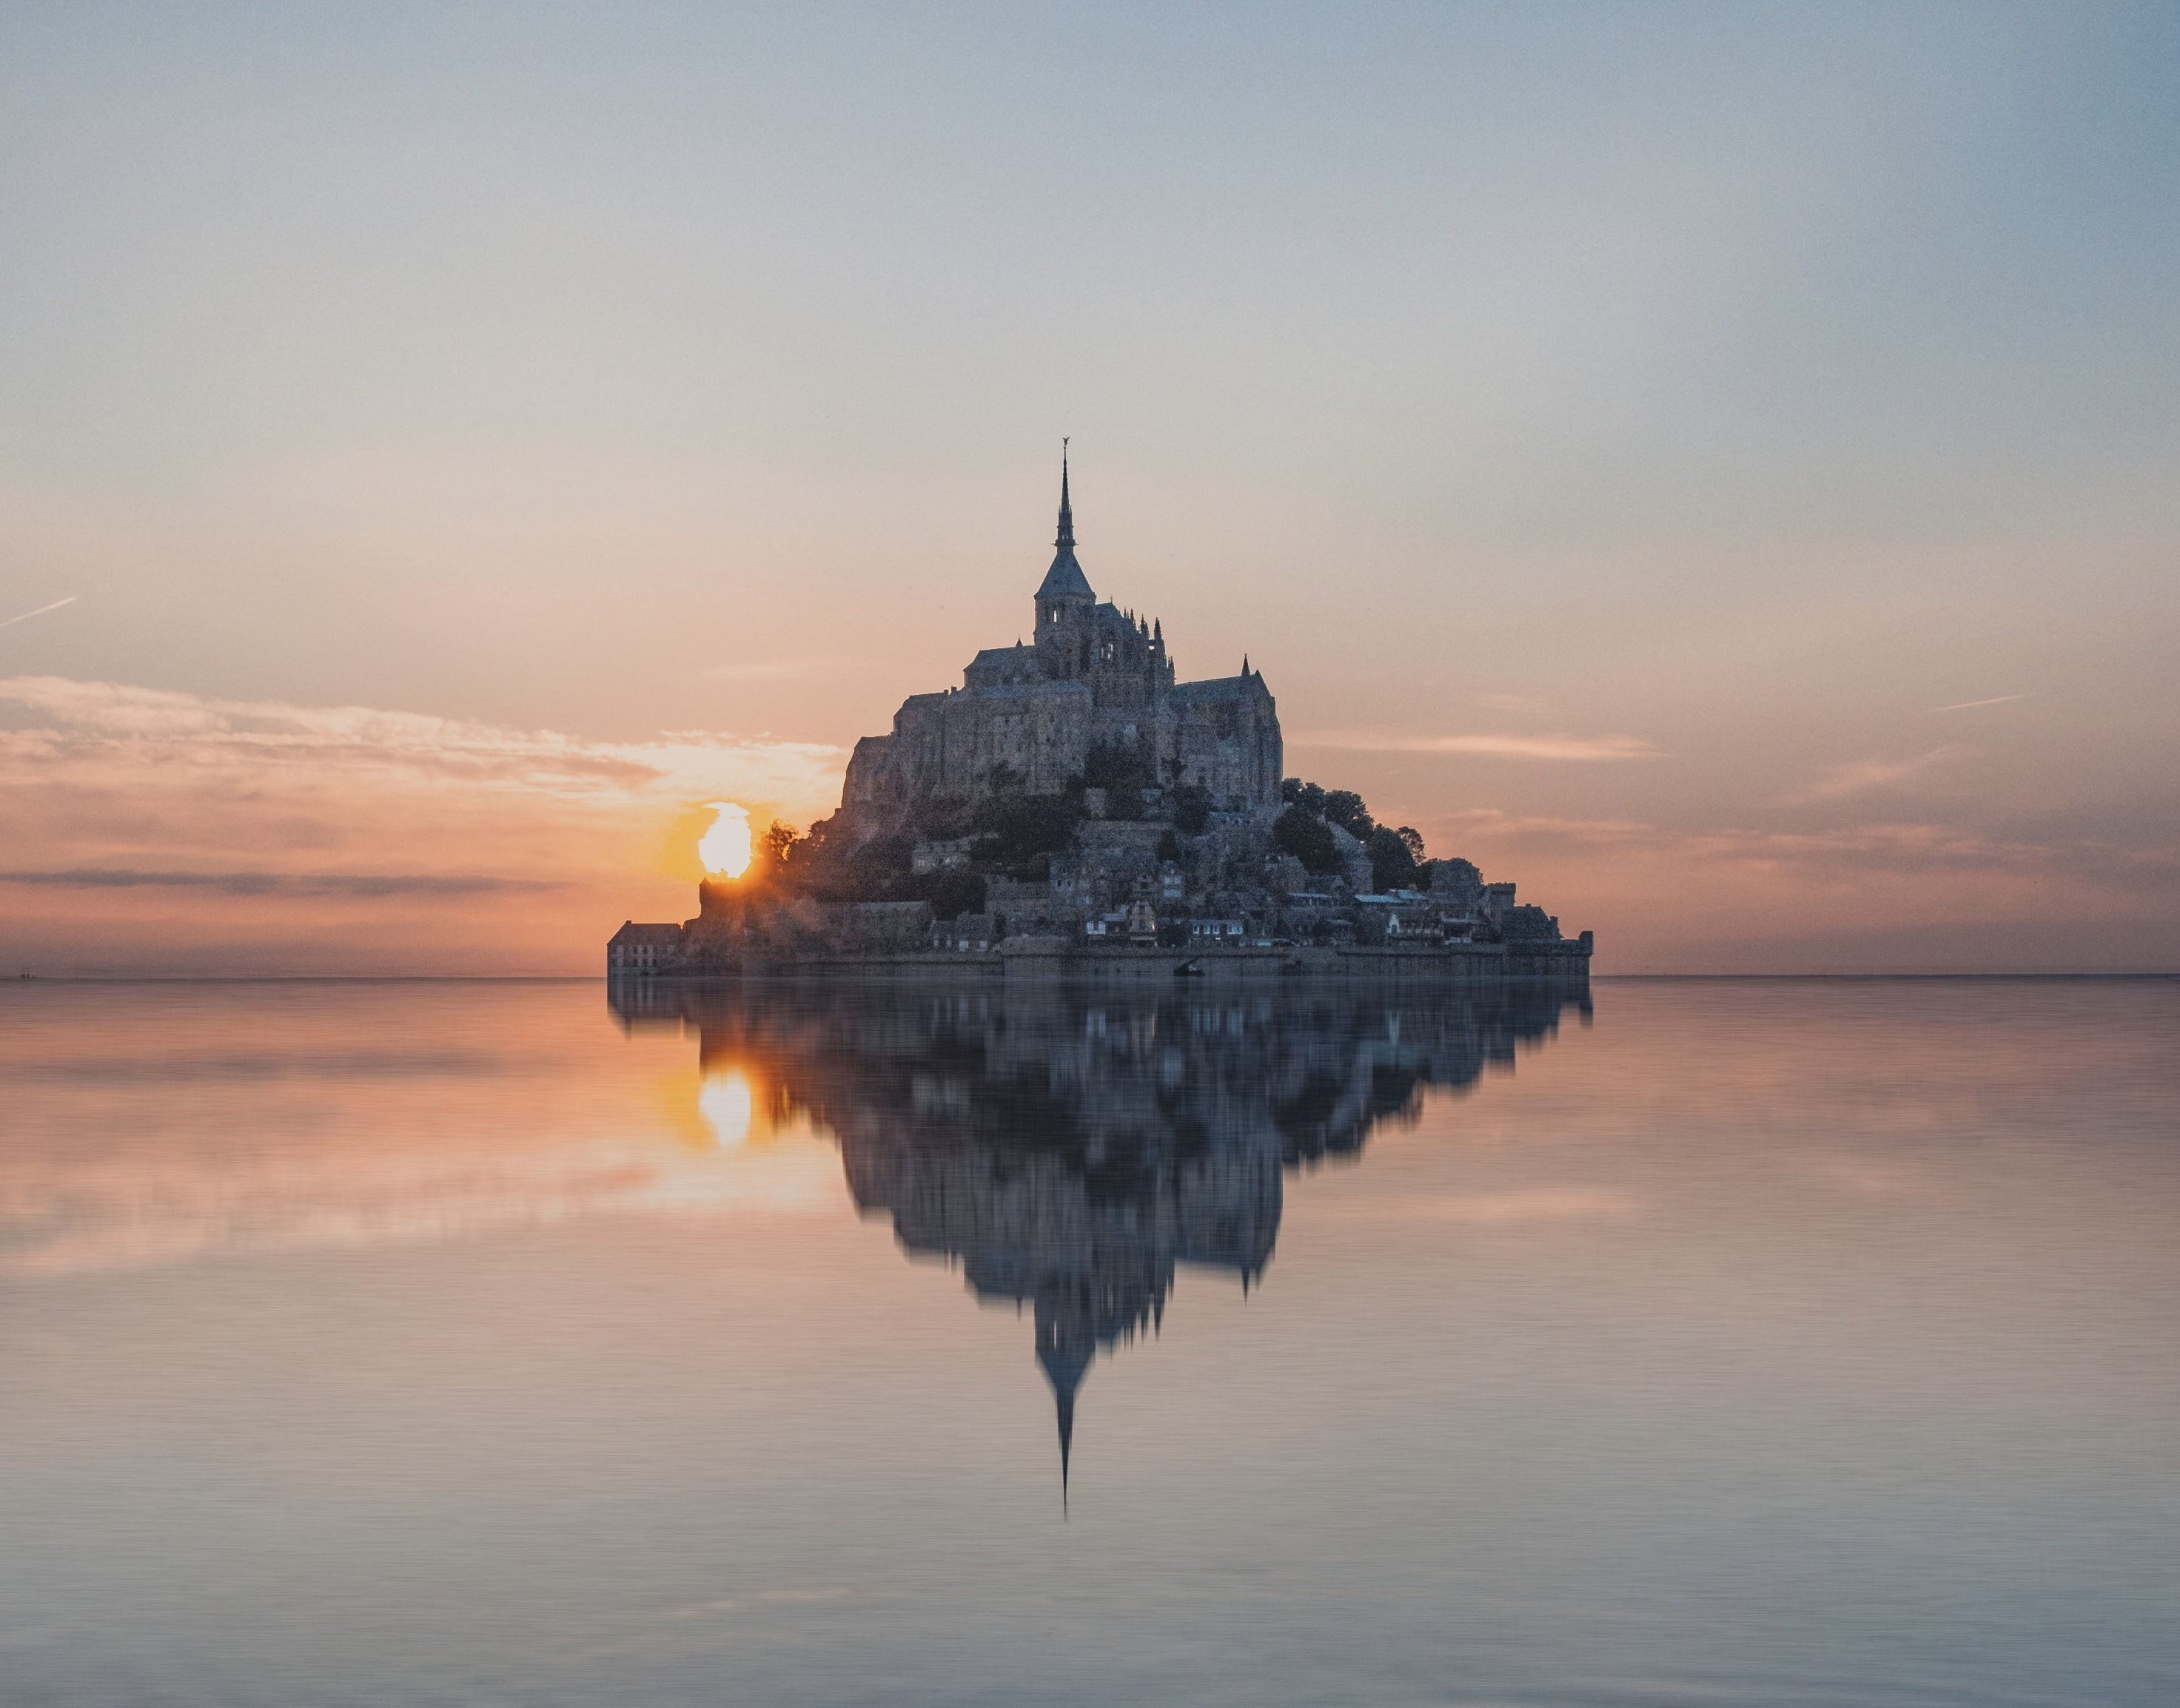 The tides of Mont-Saint-Michel vary and can alter the experiences of tourists.
Pictured: Mont-Saint-Michel at high tide during sunset 